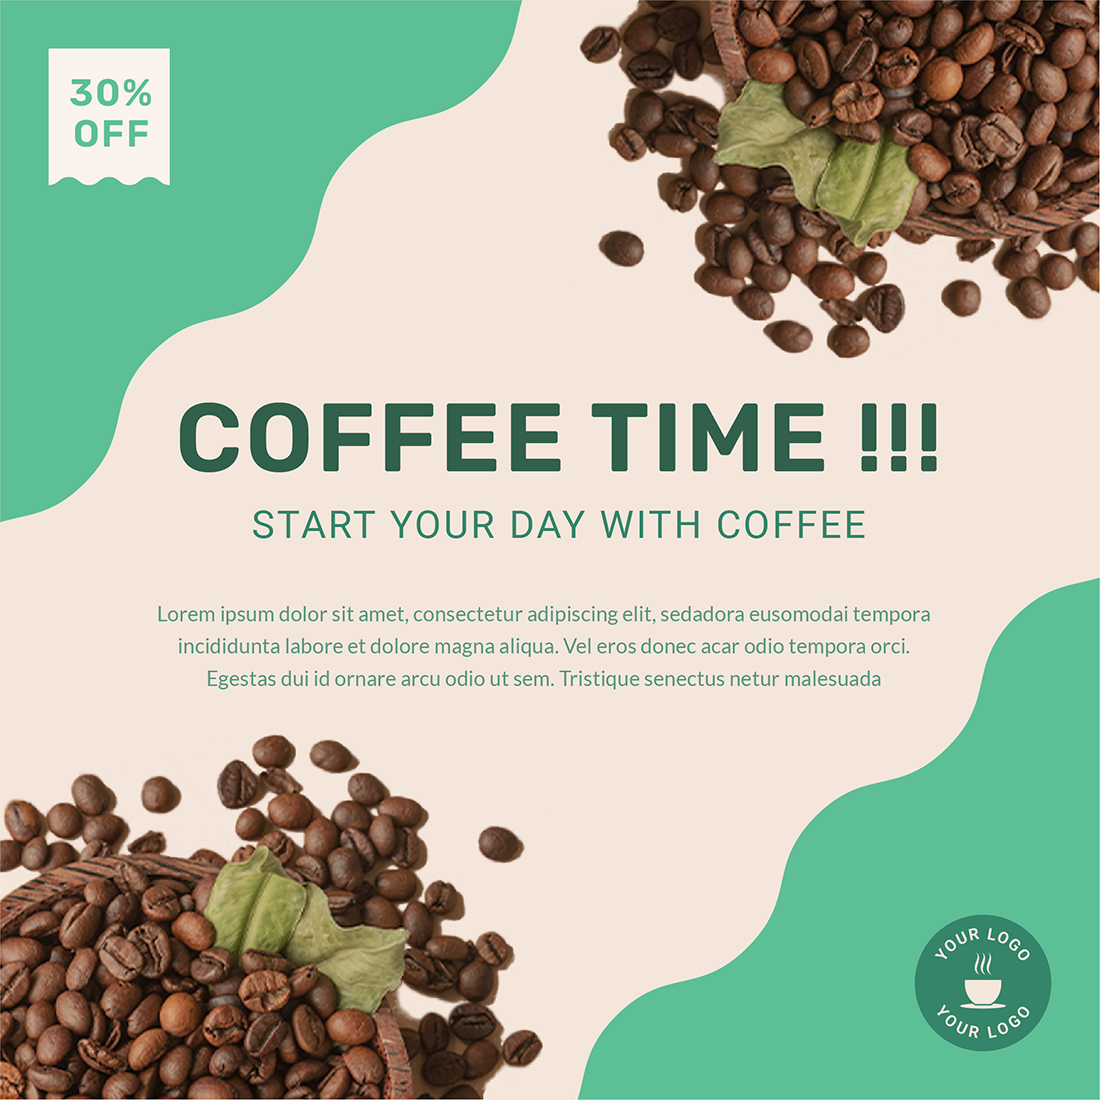 Coffee time with Coffee Shop Social Media Post Templates.